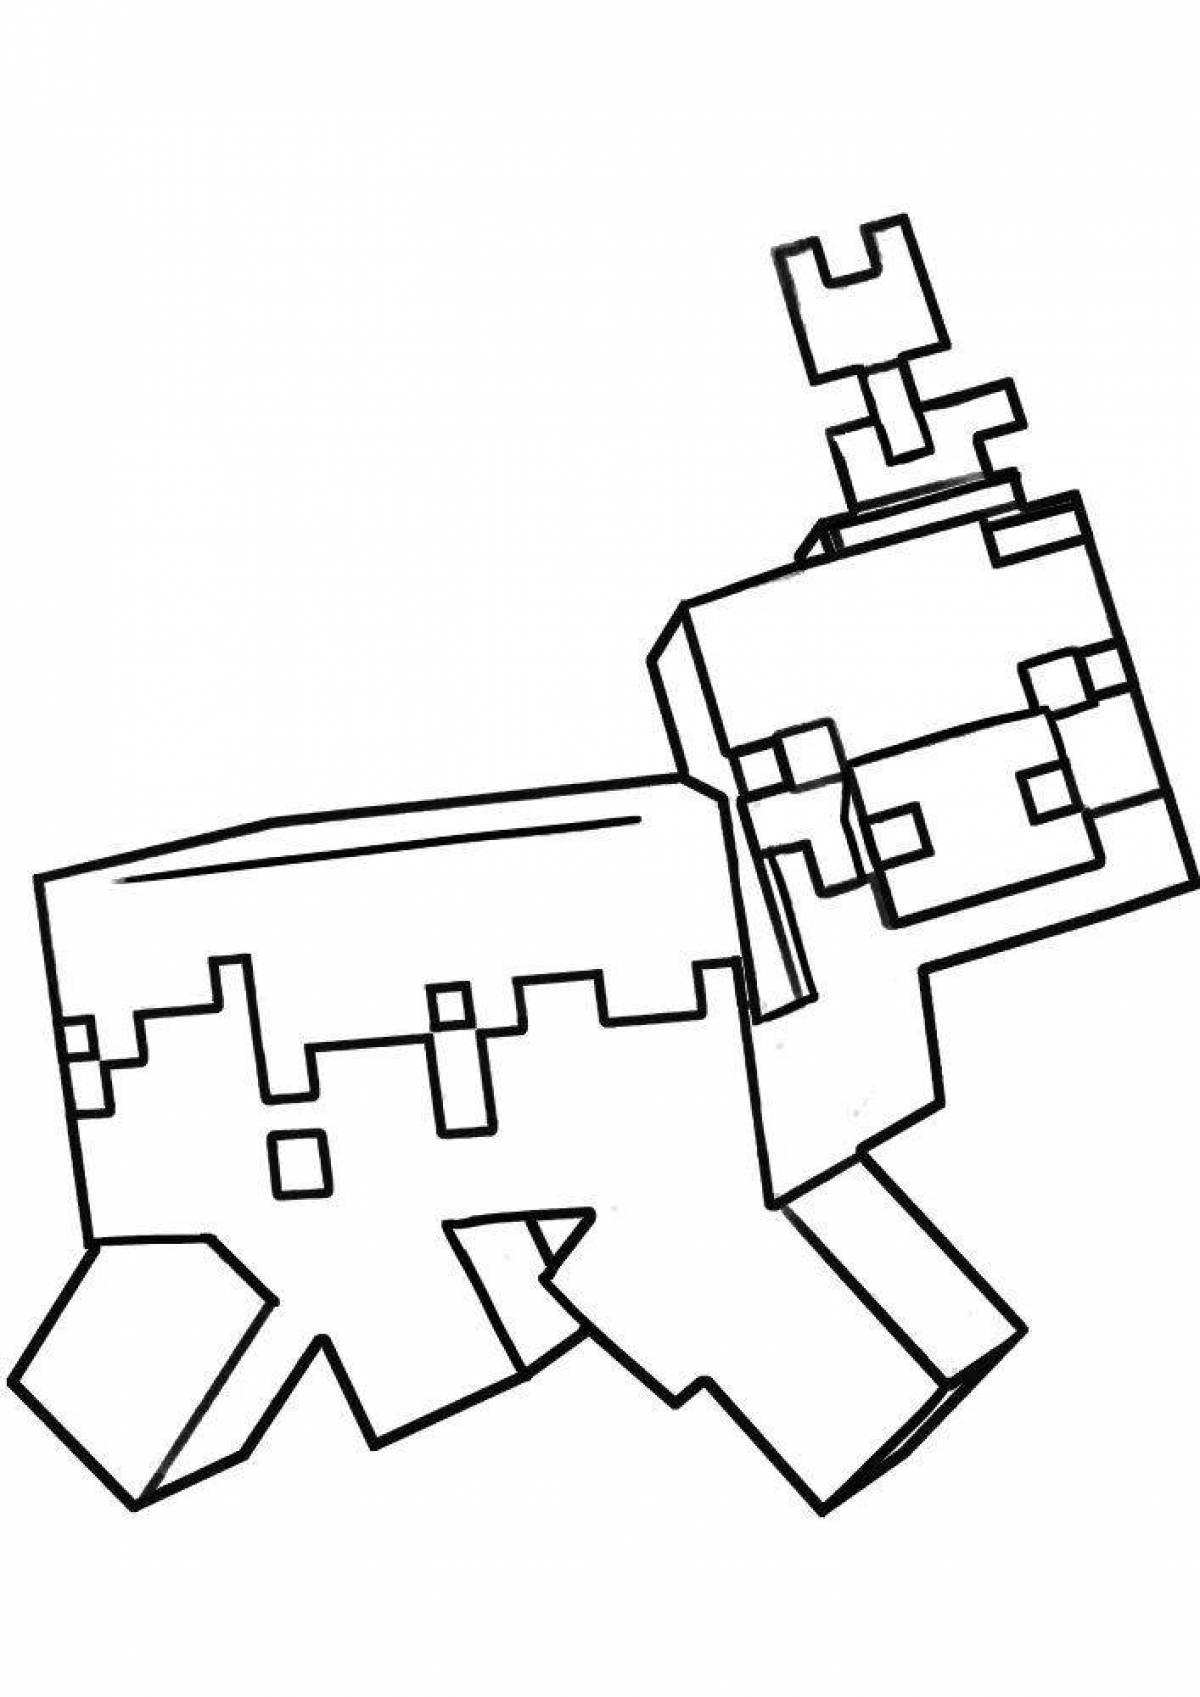 A funny minecraft pig coloring page